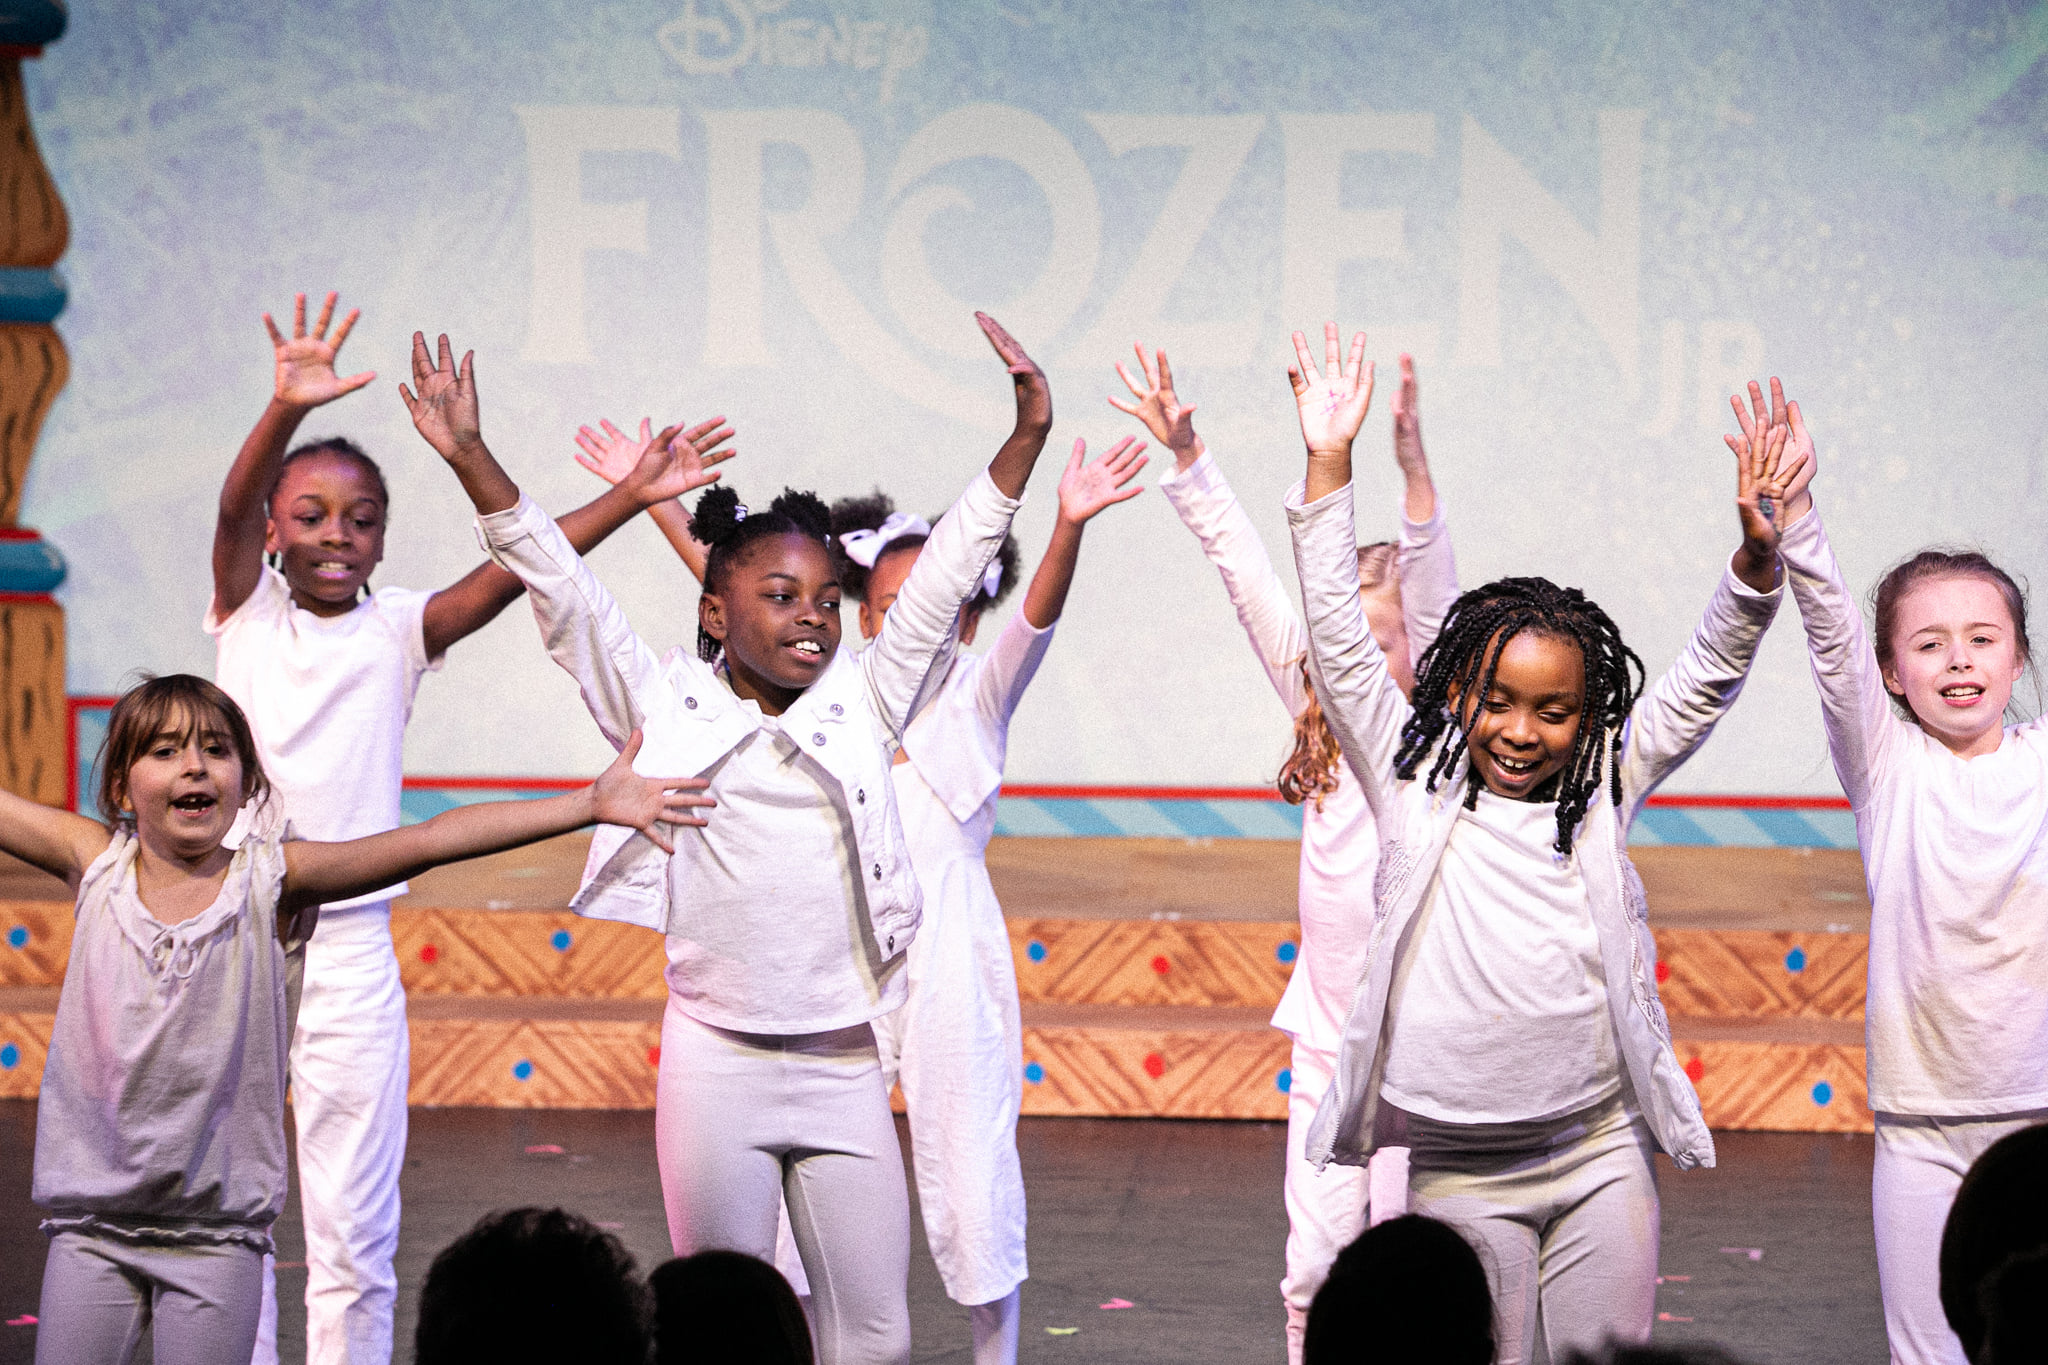 Children in white performing for a Red Mountain Theatre performance